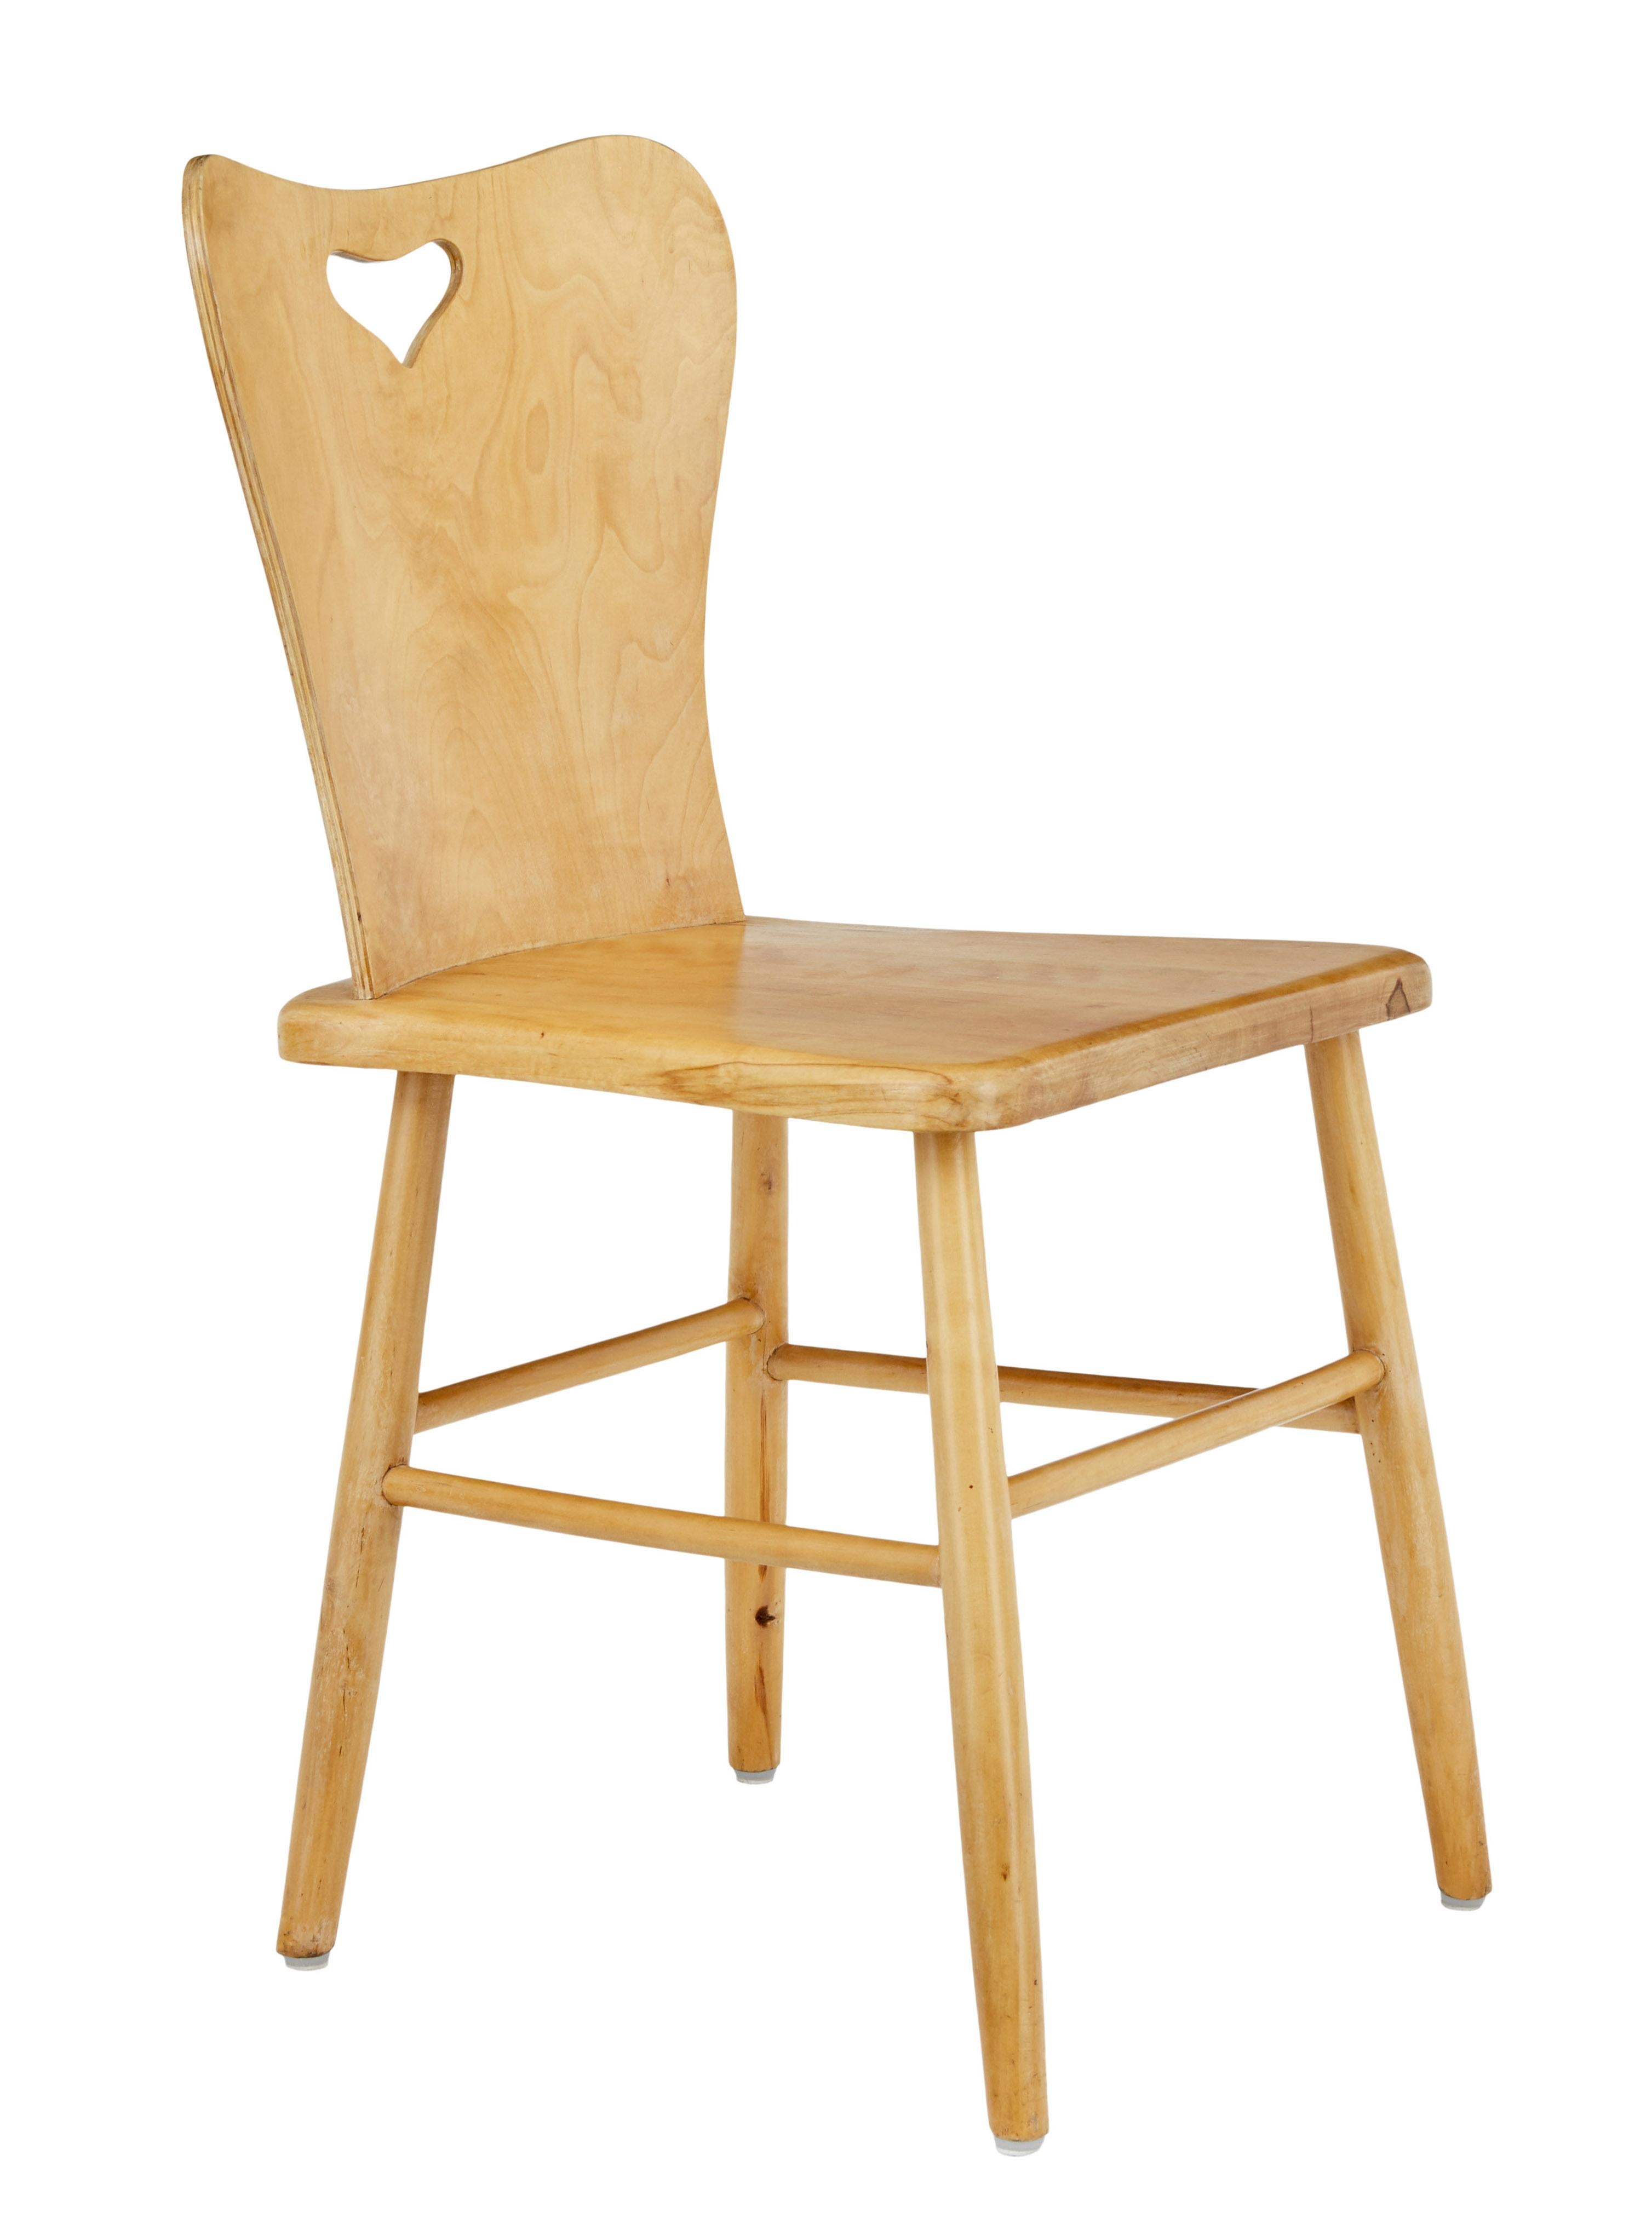 Good quality set of 6 Scandinavian design dining chairs from the 1960s.

Pine seat and legs with birch veneered back rests. Shaped backs with heart shaped handle. Turned legs united by stretchers.

Good functional chairs with elegant